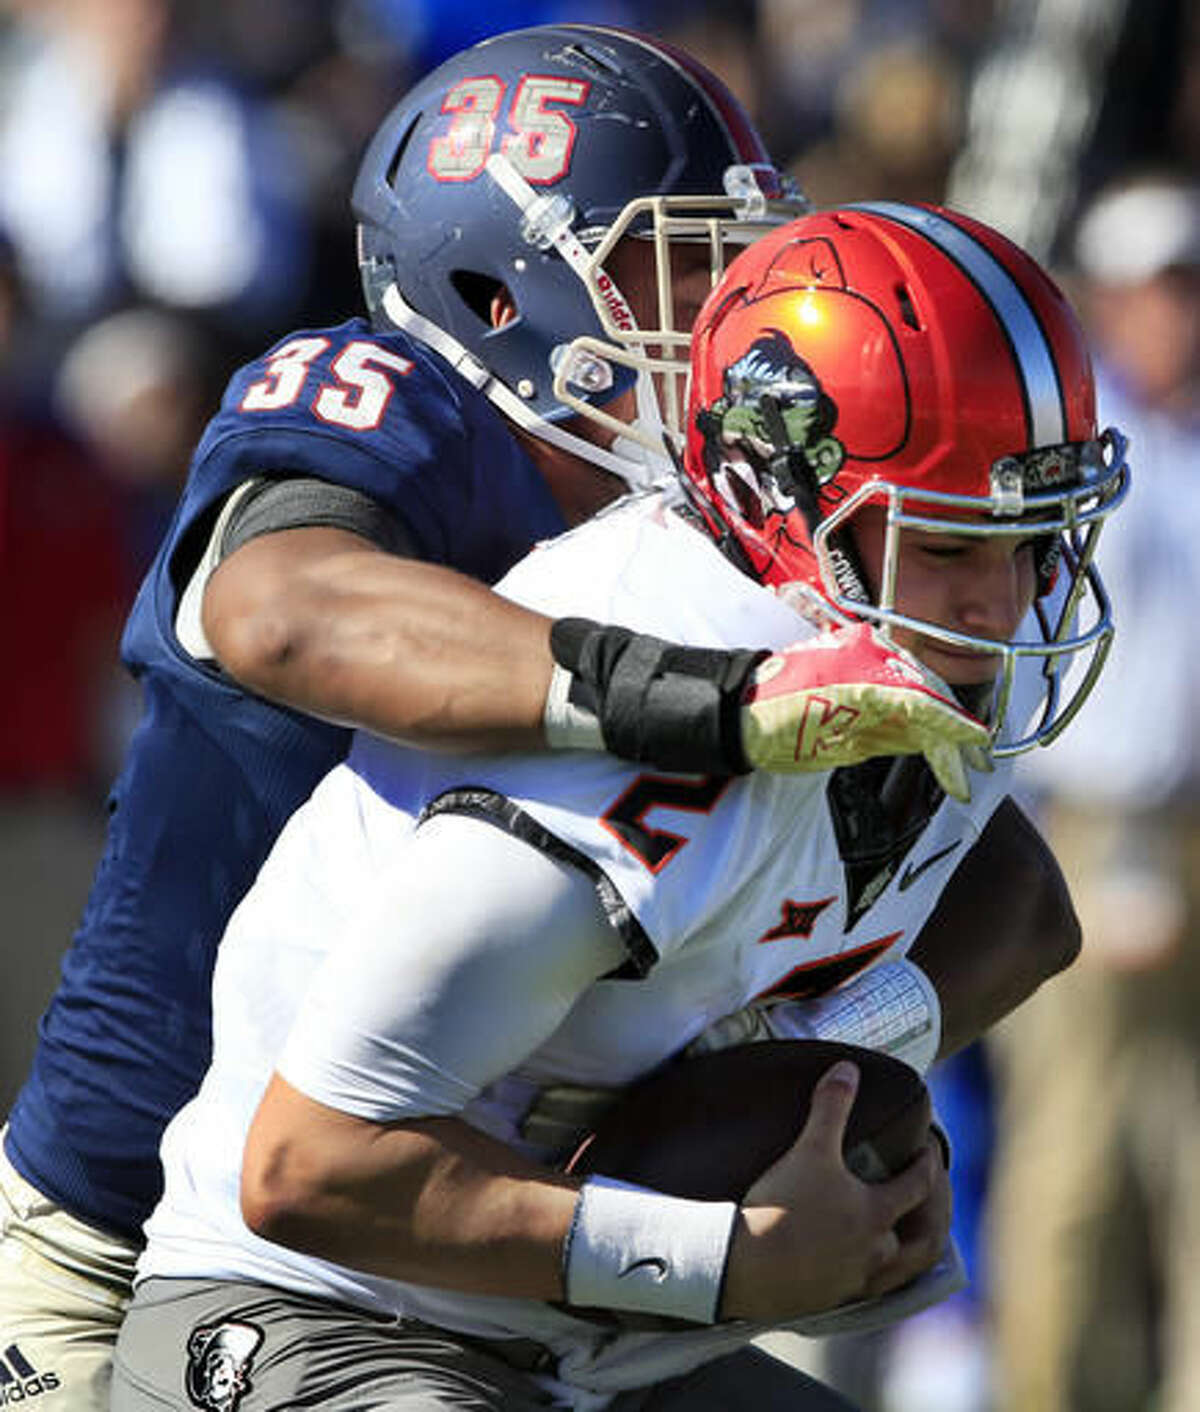 Oklahoma State quarterback Mason Rudolph (2) is sacked by Kansas defensive end Anthony Olobia (35) during the second half of an NCAA college football game in Lawrence, Kan., Saturday, Oct. 22, 2016. (AP Photo/Orlin Wagner)